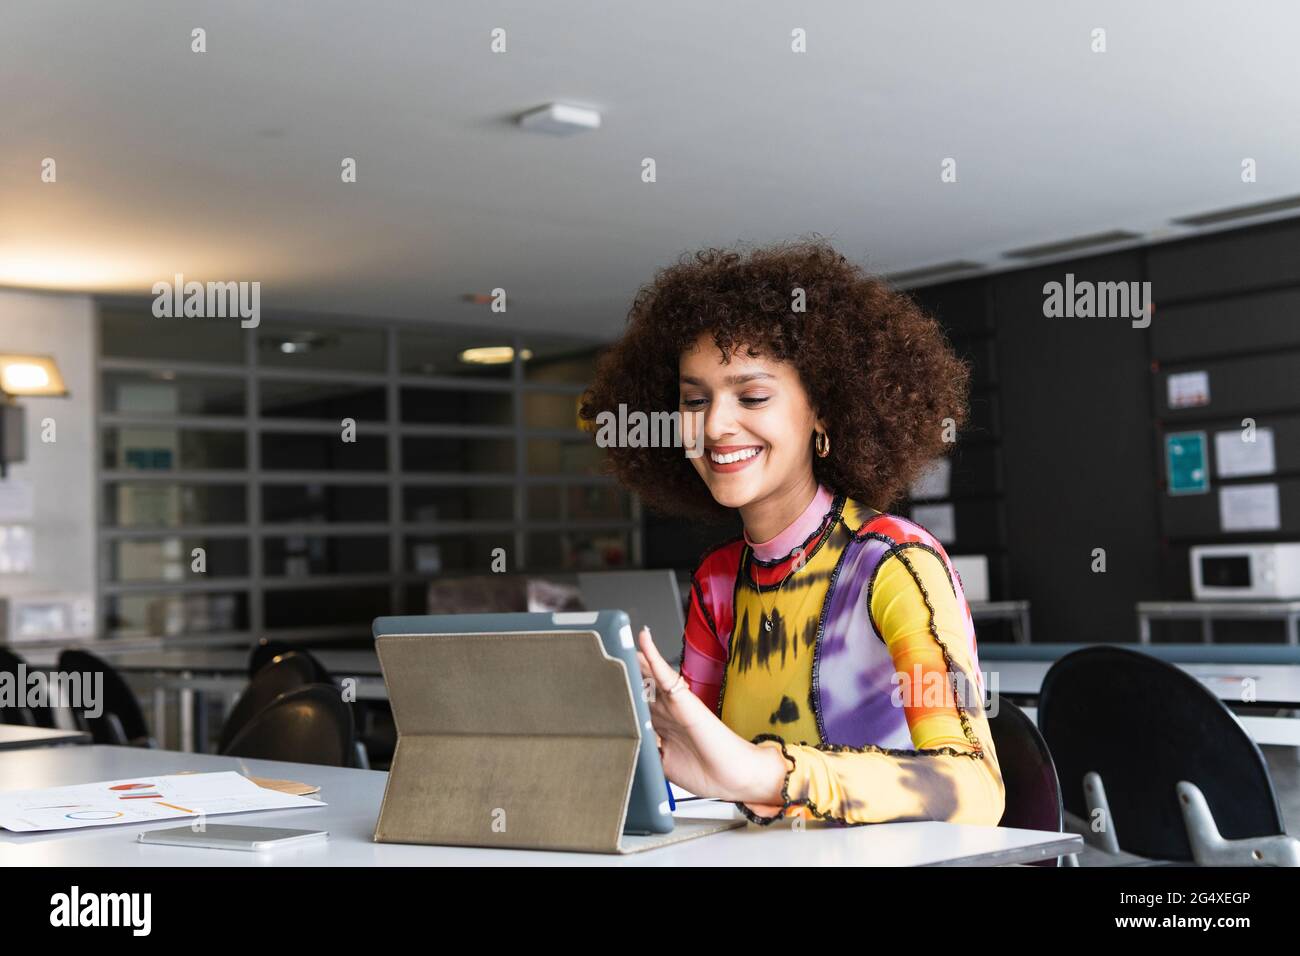 Smiling university student using digital tablet in library Stock Photo